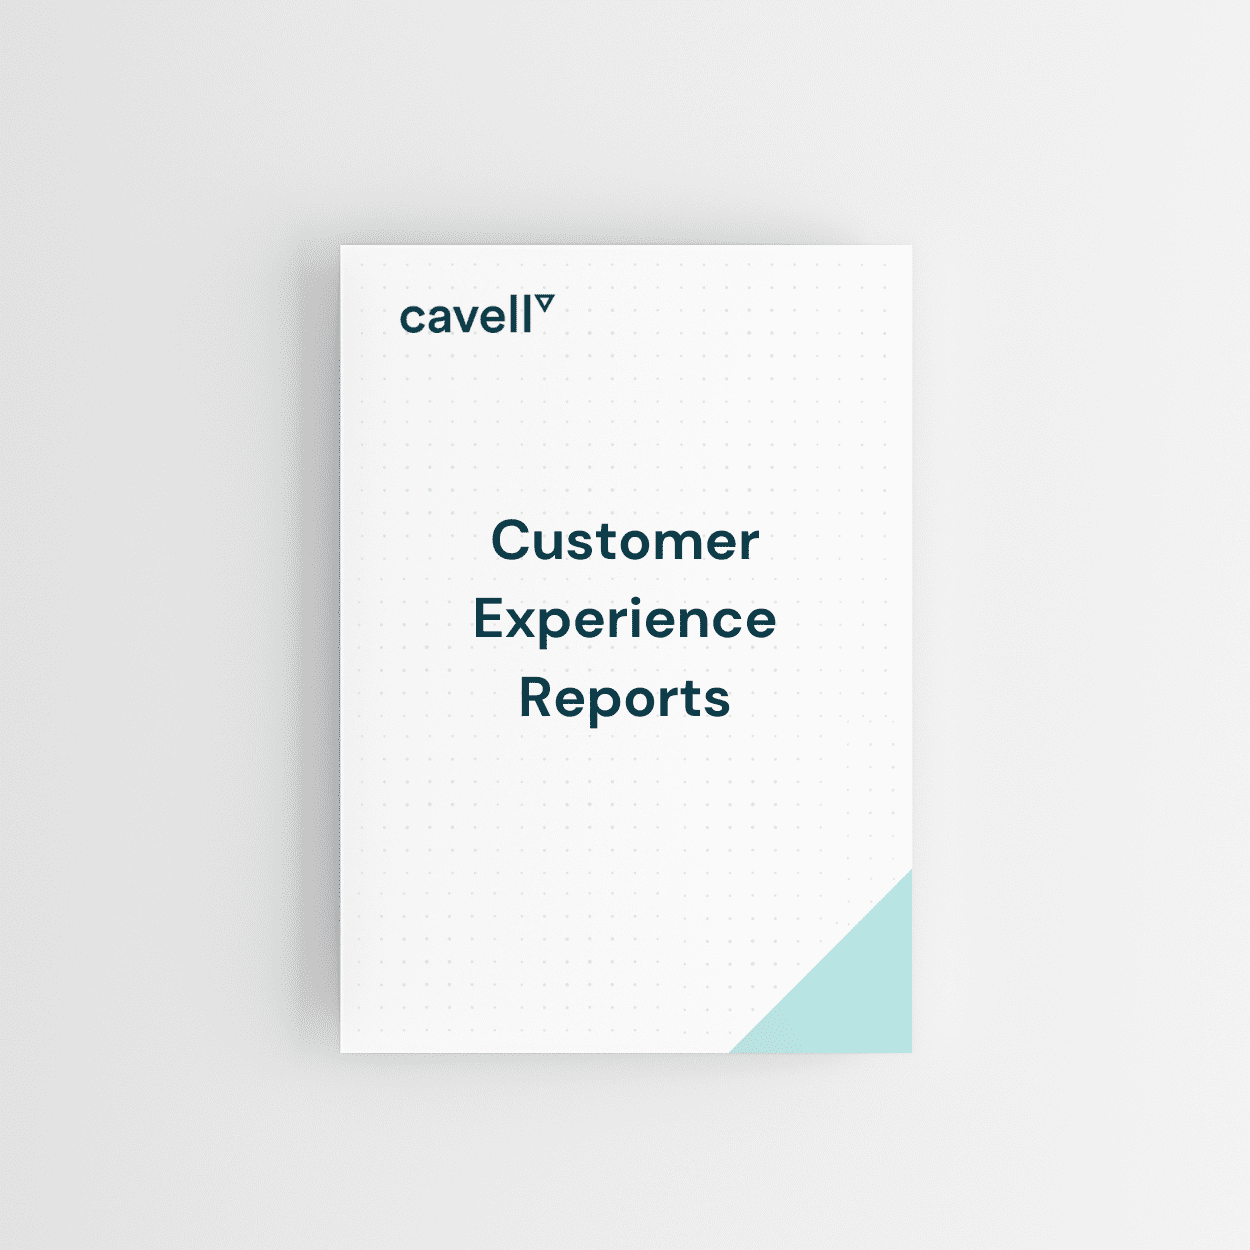 Customer Experience Reports